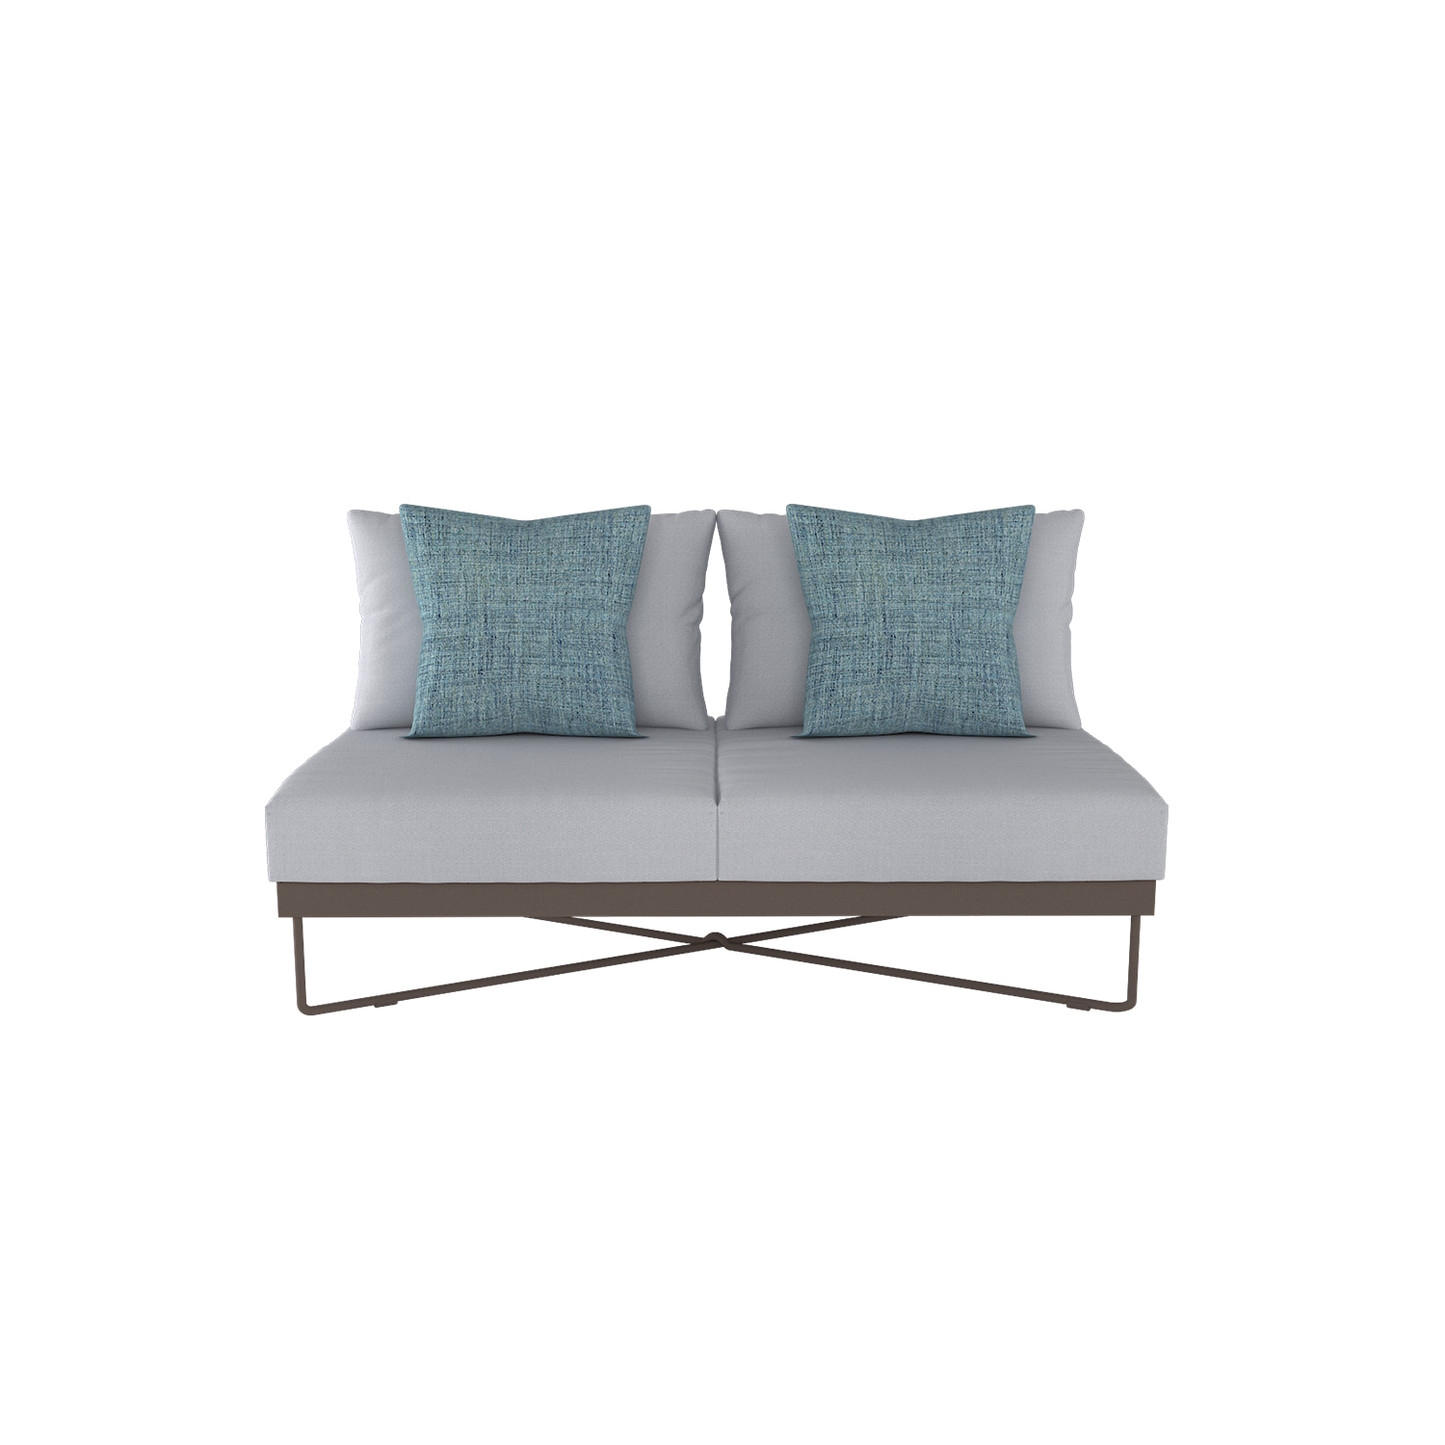 Coral Reef Outdoor Loveseat with Aluminum Back | Roberti | Outdoor Lounge chairs | coral-reef-outdoor-loveseat-2